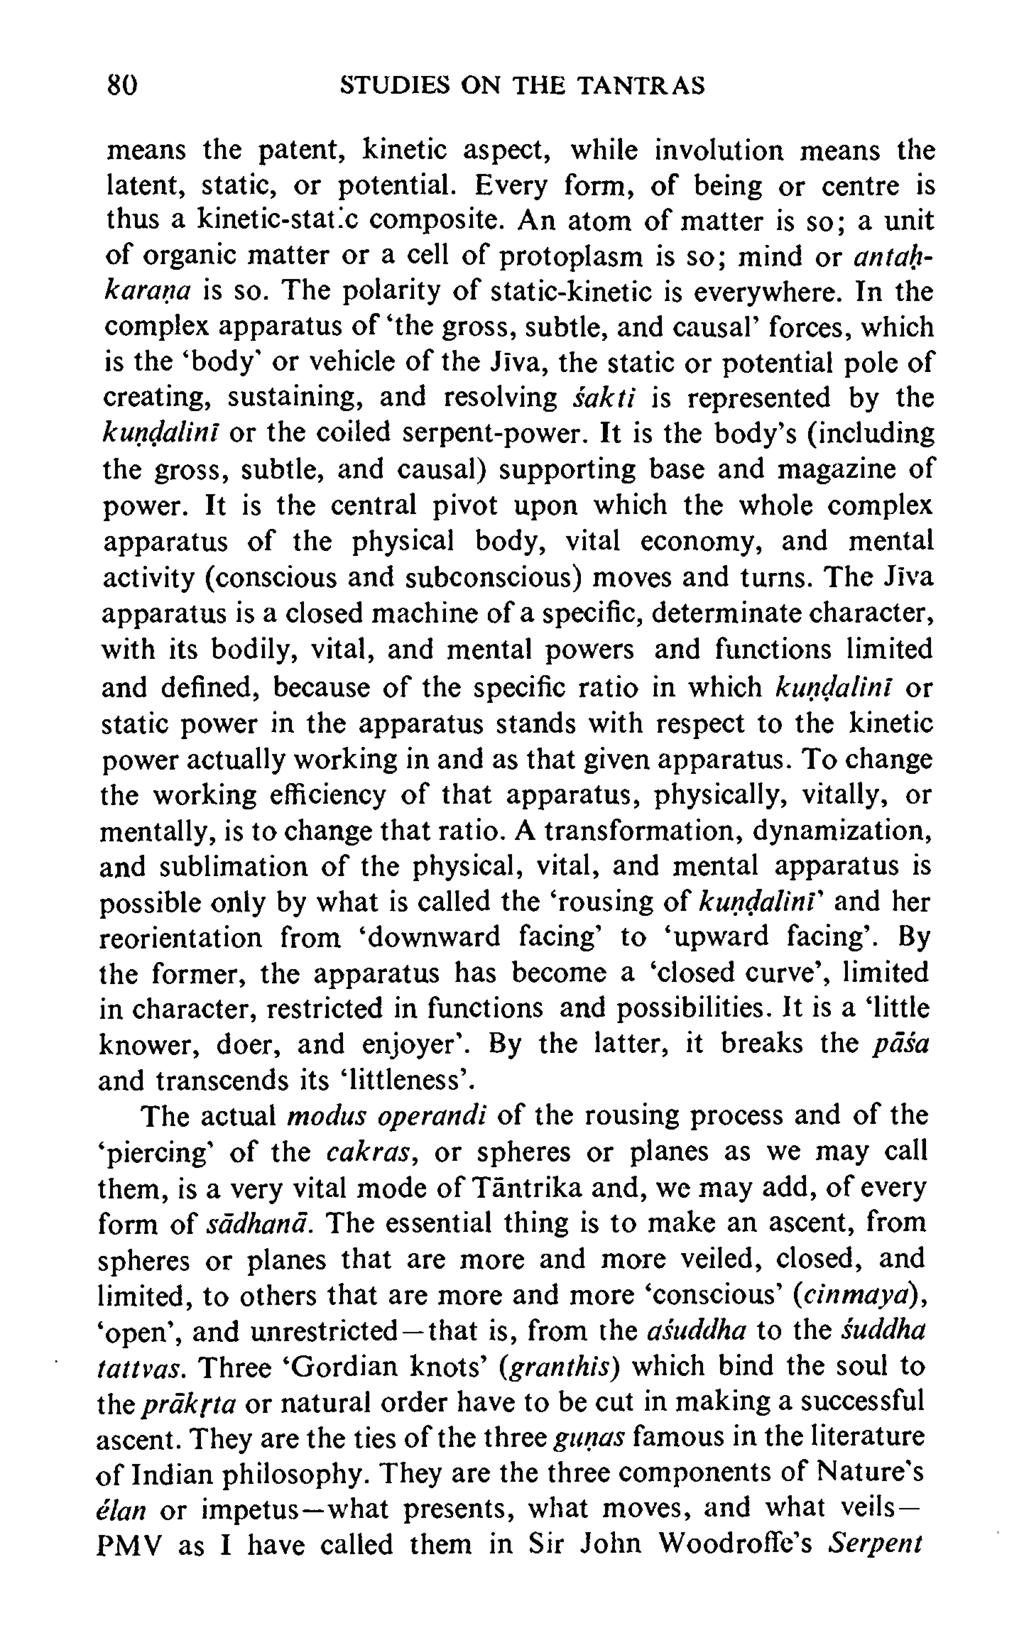 80 STUDIES ON THE TANTRAS means the patent, kinetic aspect, while involution means the latent, static, or potential. Every form, of being or centre is thus a kinetic-static composite.